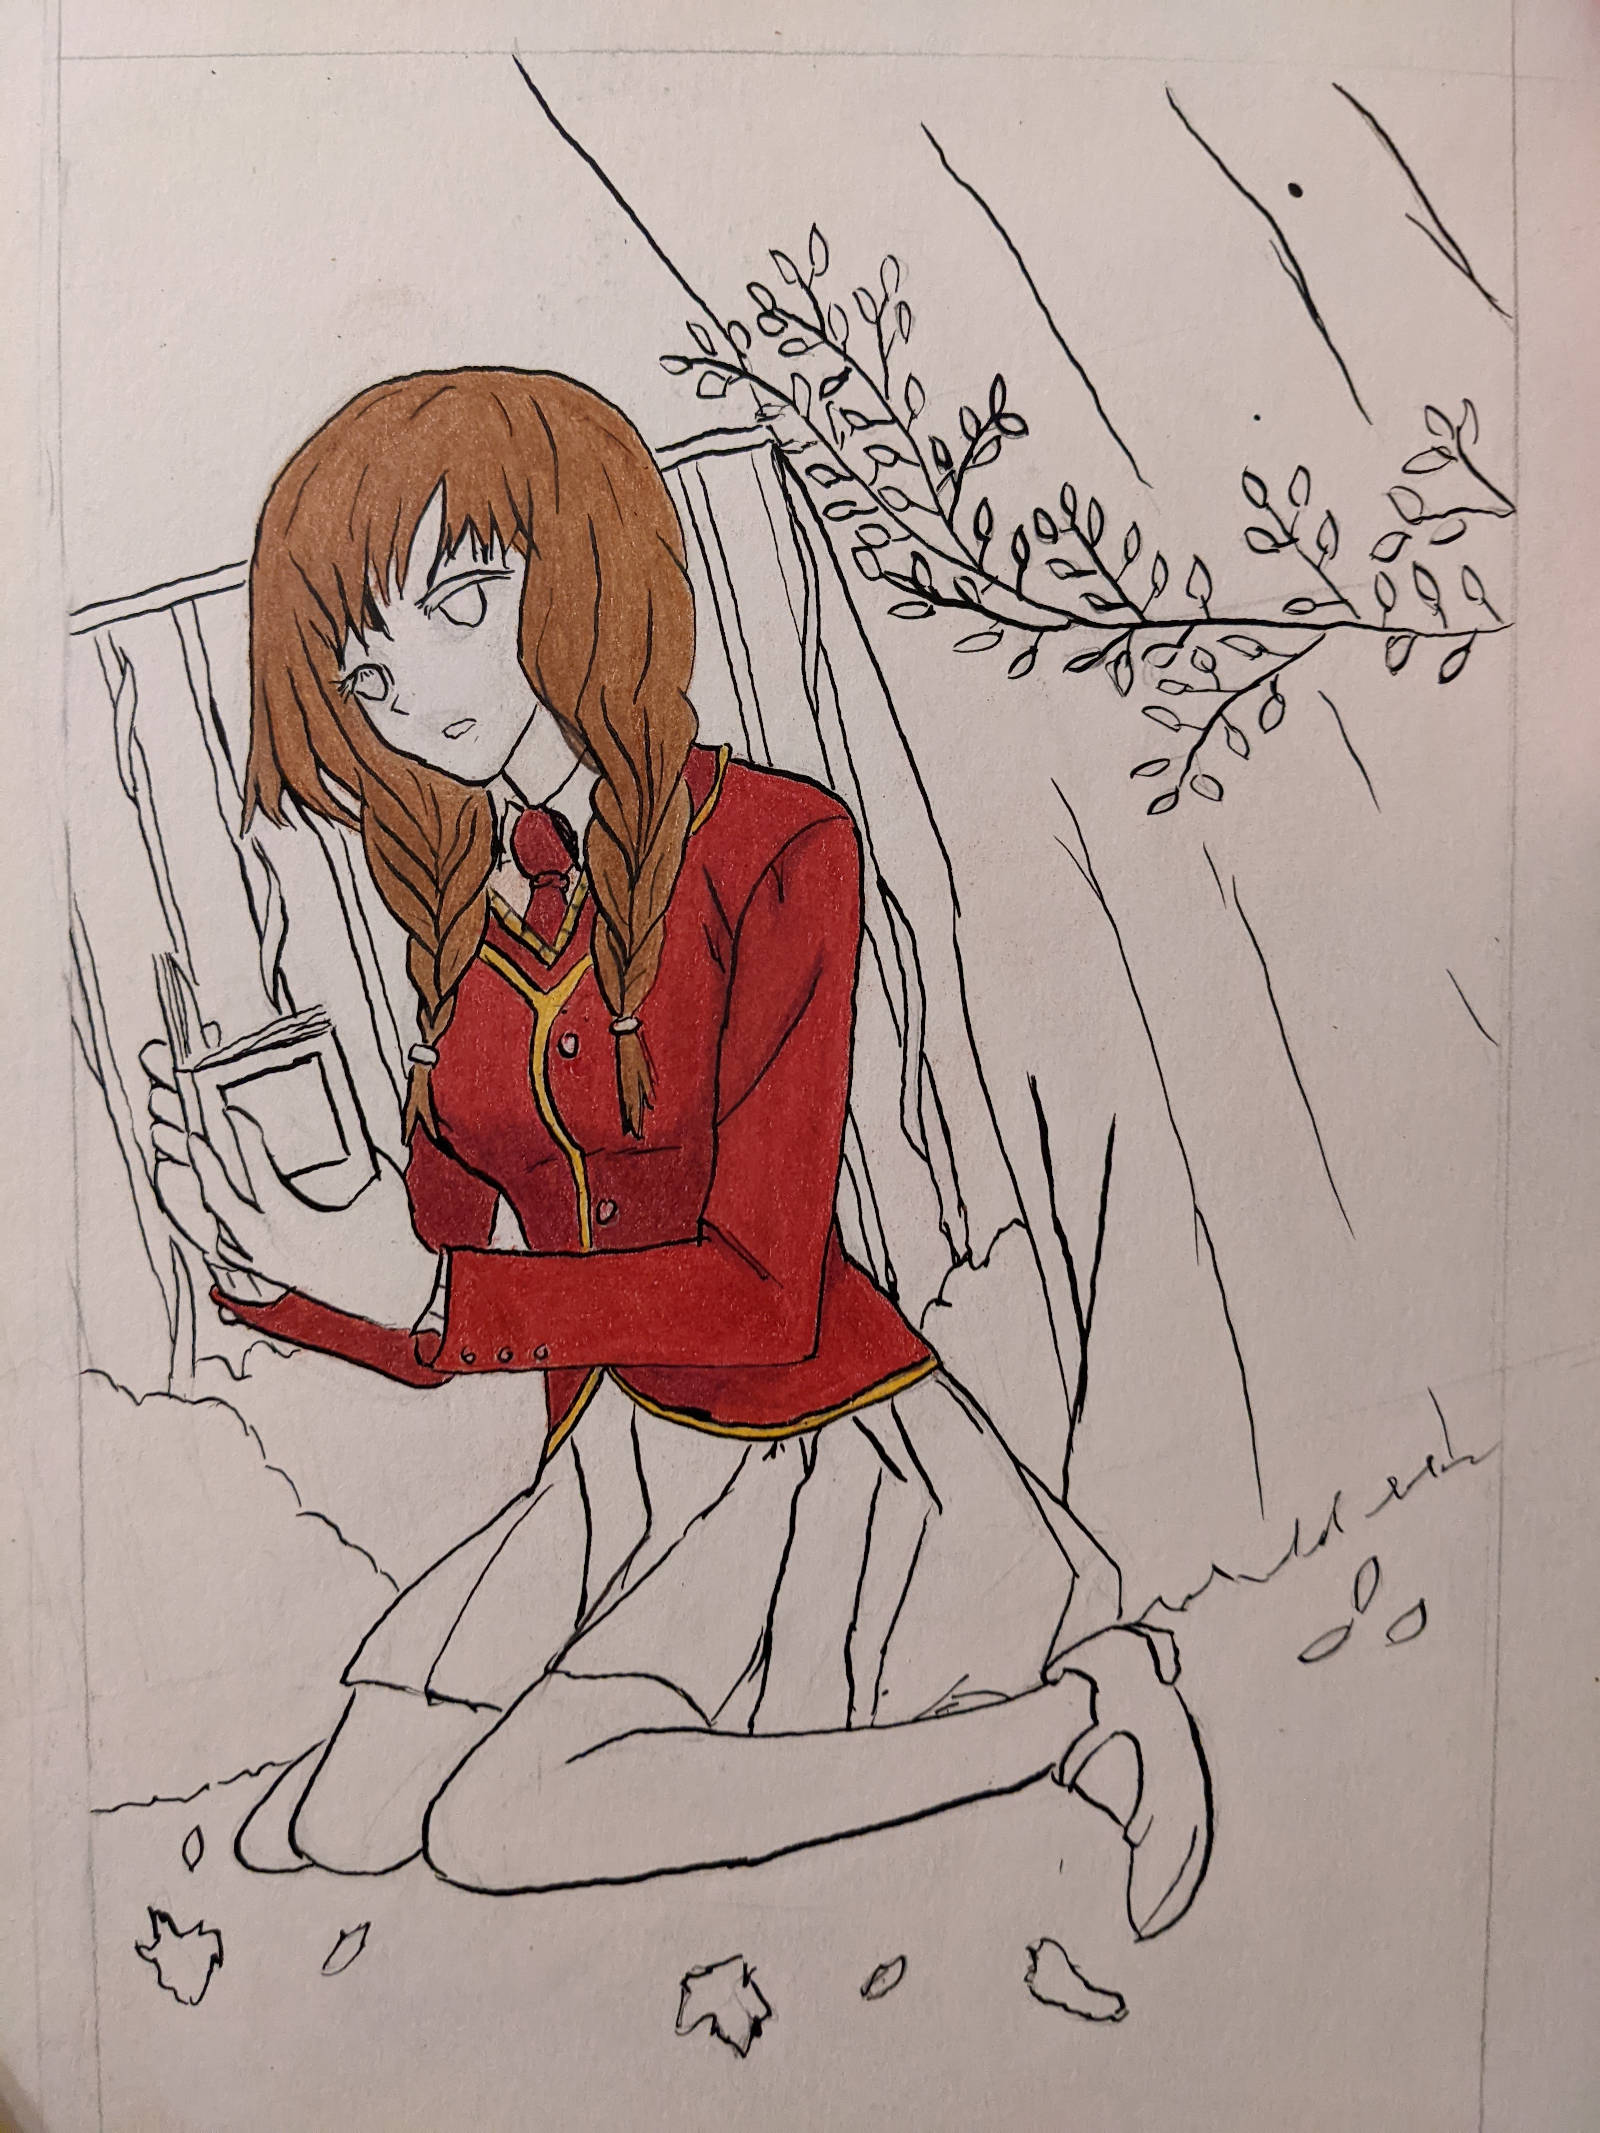 Girl with red blazer and skirt sitting in front of bushes and a fence. A tree is next to her. She is reading a diary. Only her hair and blazer are colored.